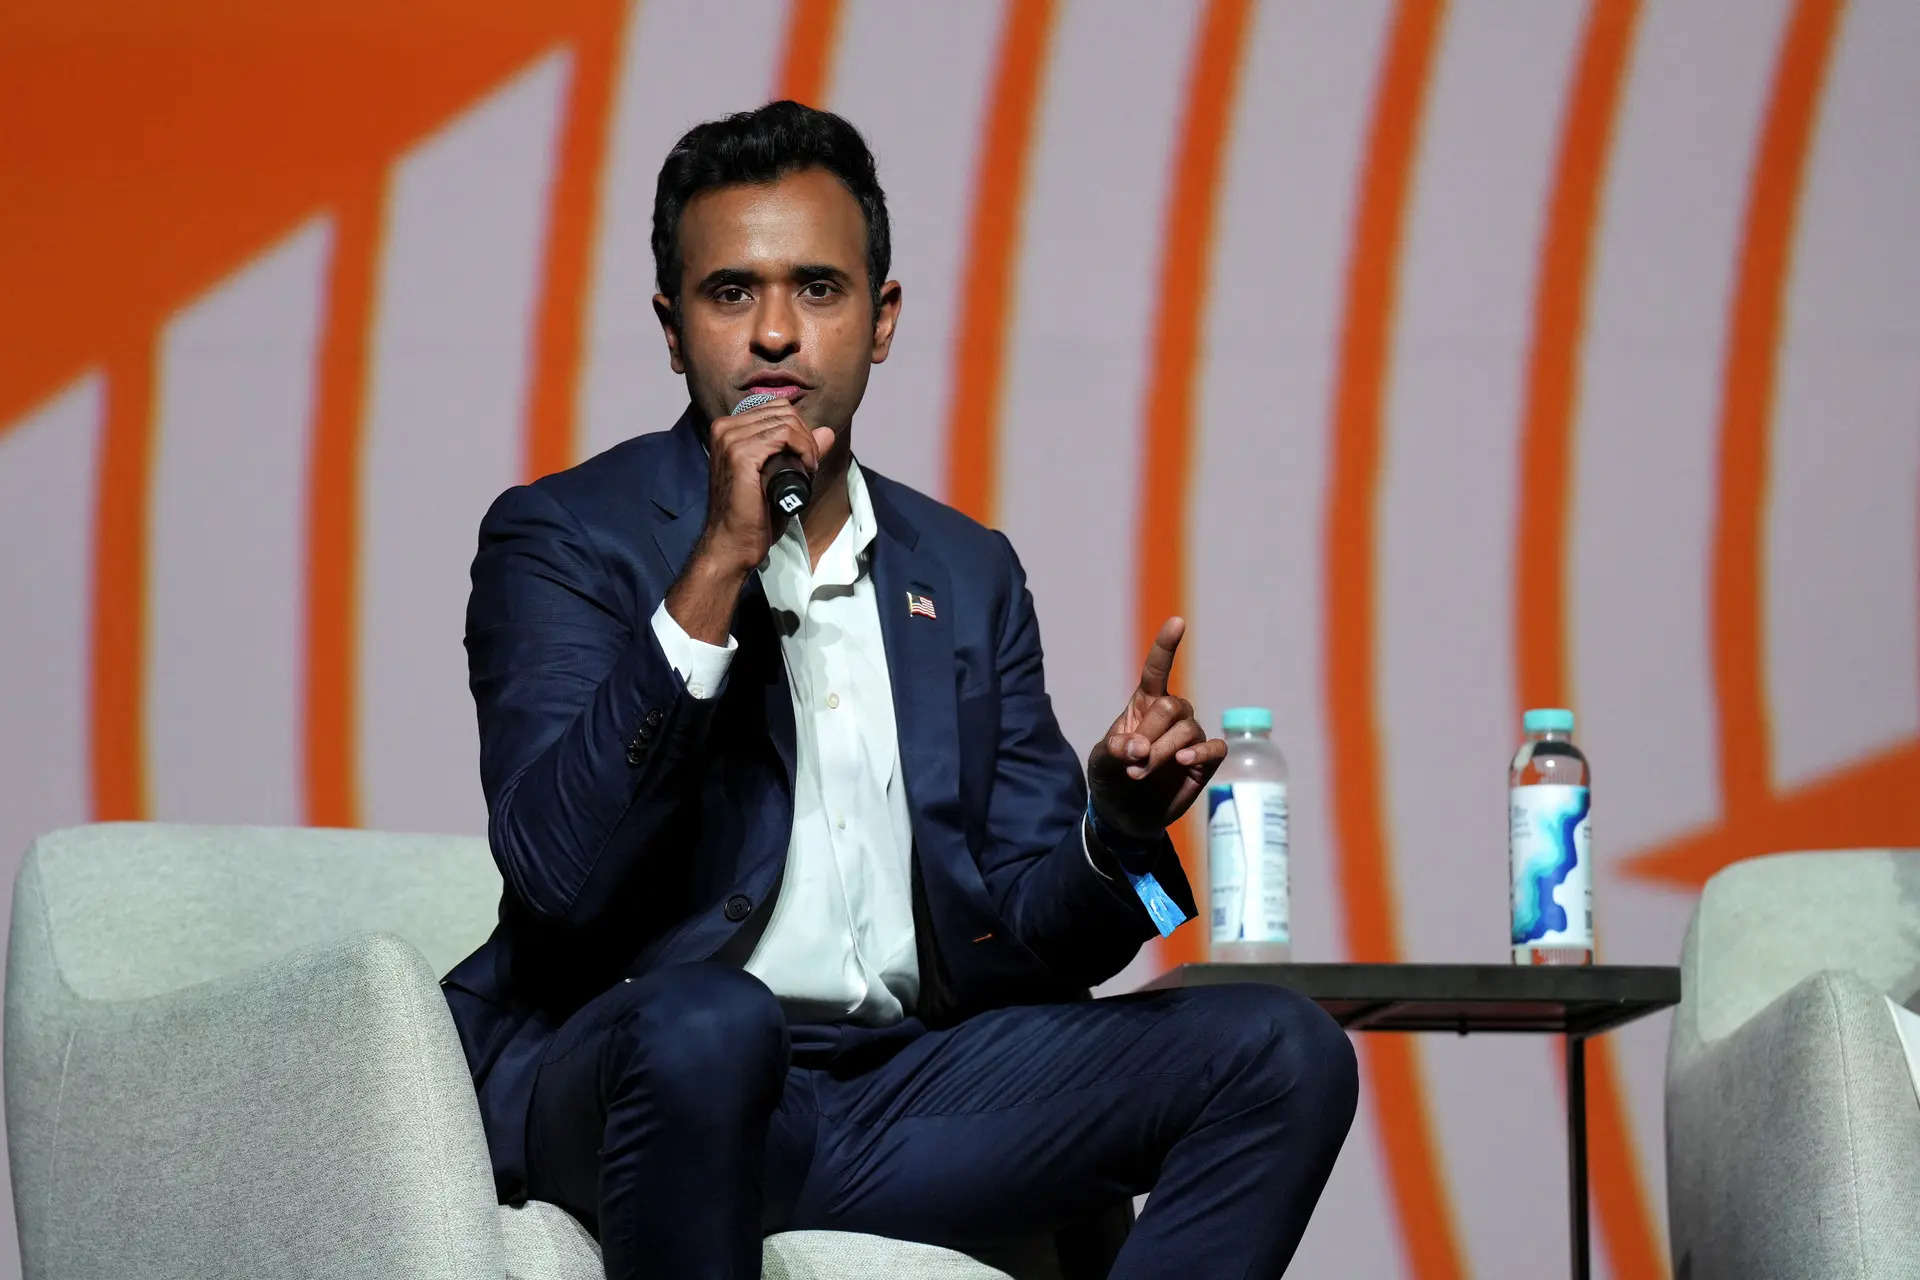 Indian Americans offended as Kamala Harris cast aside her Indian identity: Vivek Ramaswamy 